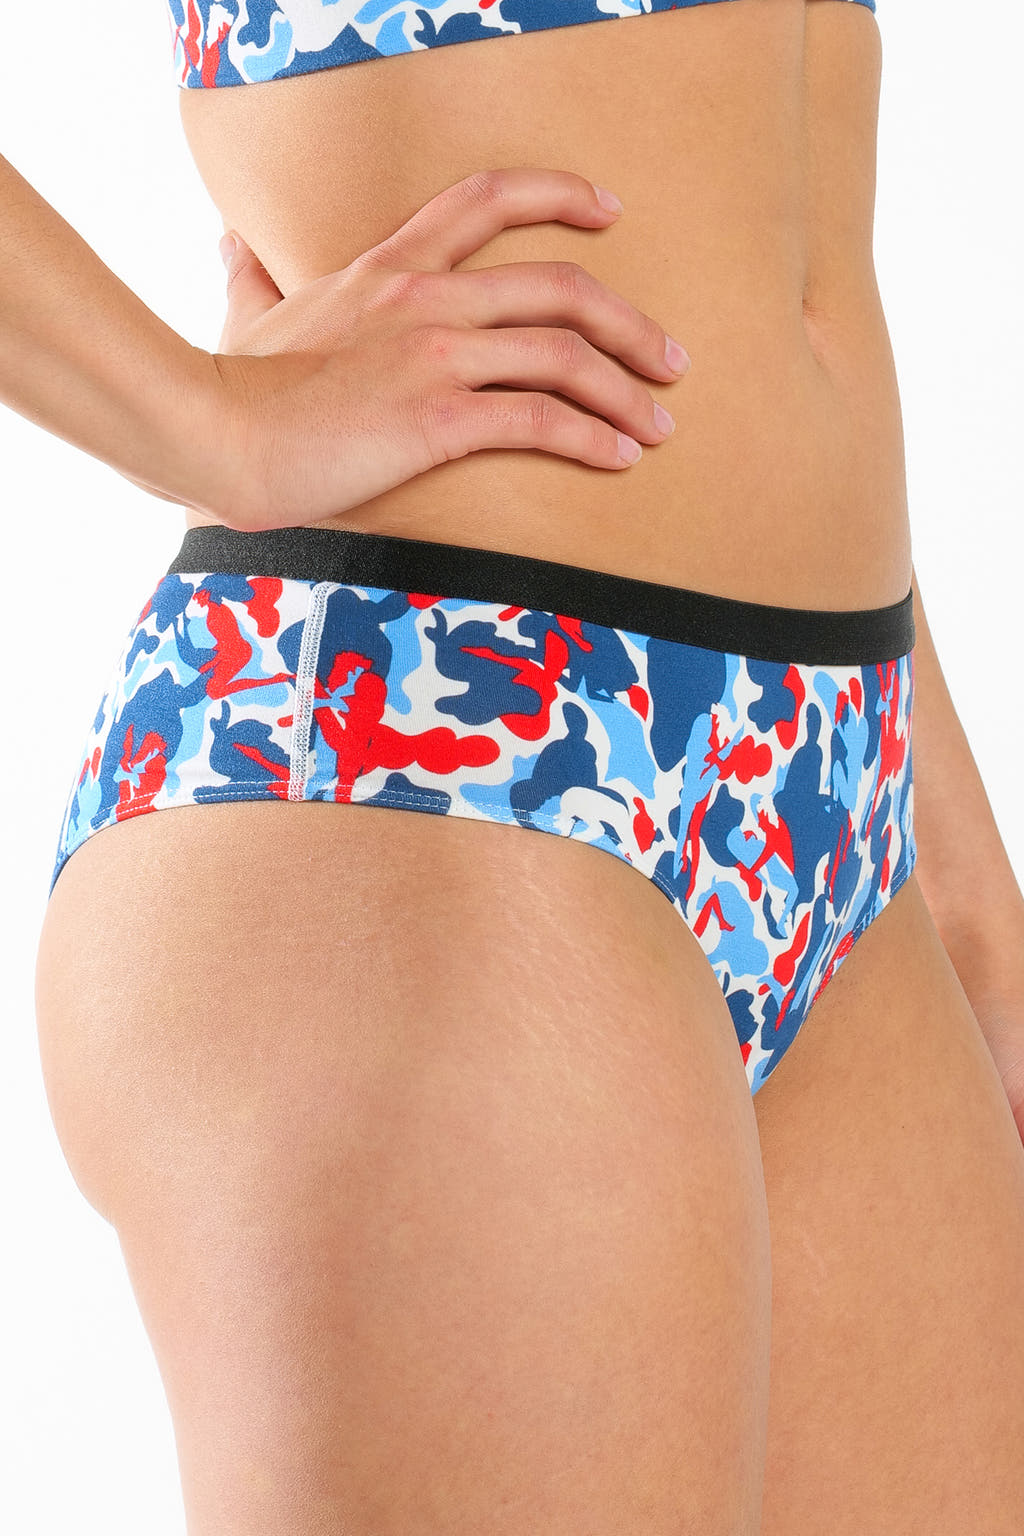 Blue, white and red camouflage cheeky underwear